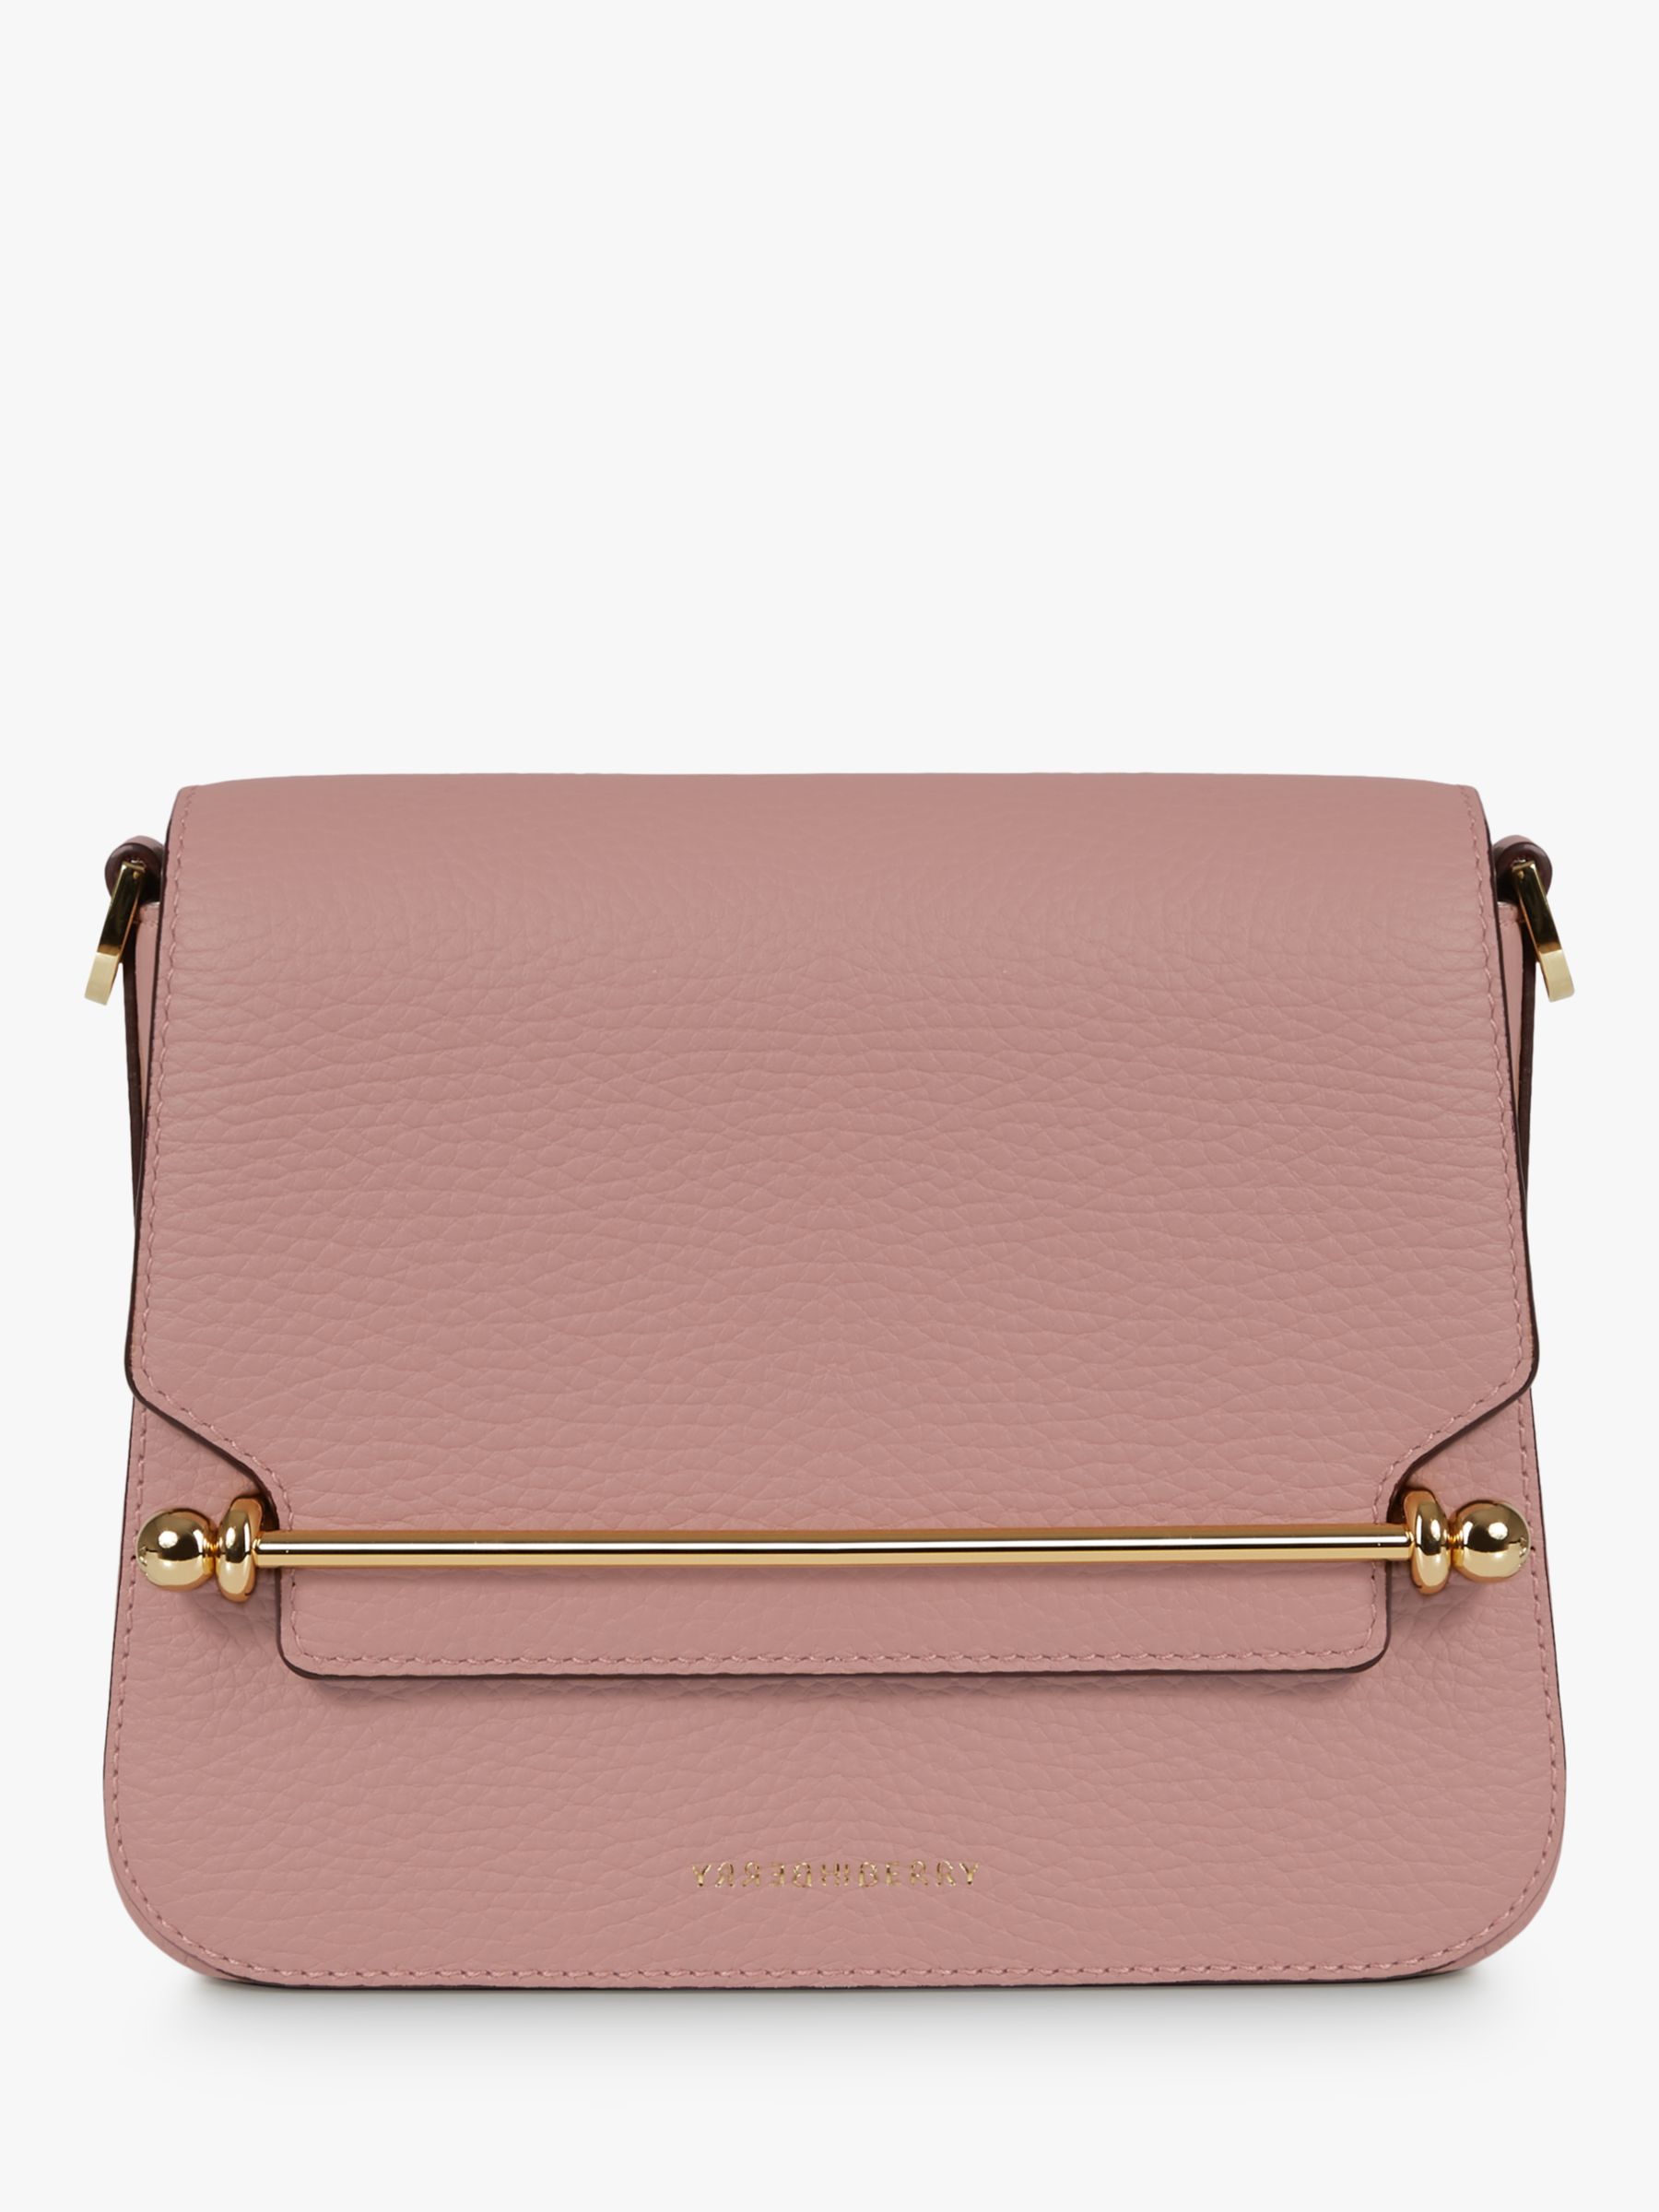 Strathberry East/West Baguette Bag OS Pink Leather